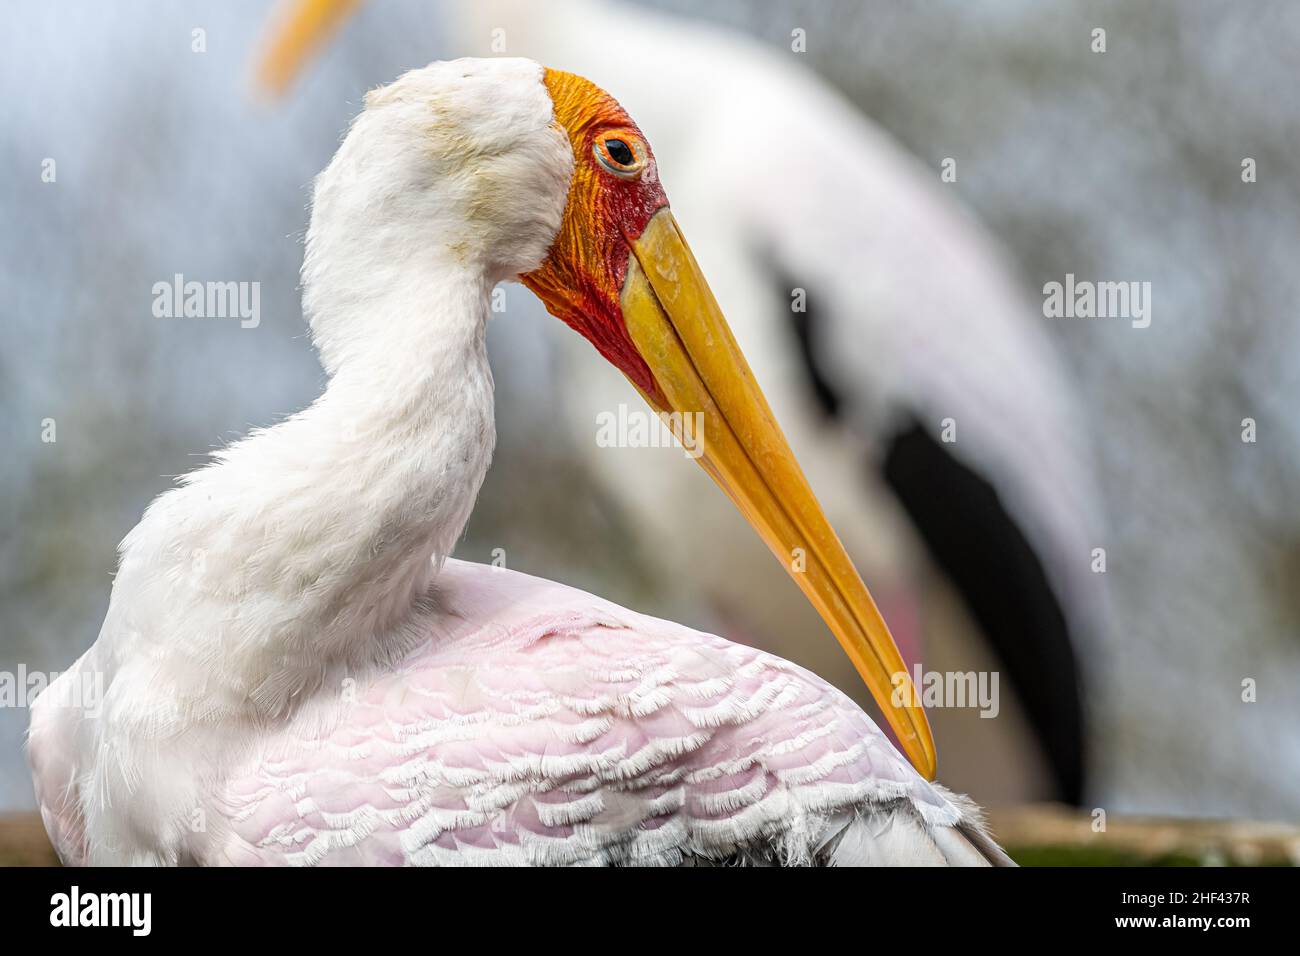 Coy yellow billed stork (Mycteria ibis) in the River Valley Aviary at Jacksonville Zoo and Gardens in Jacksonville, Florida. (USA) Stock Photo